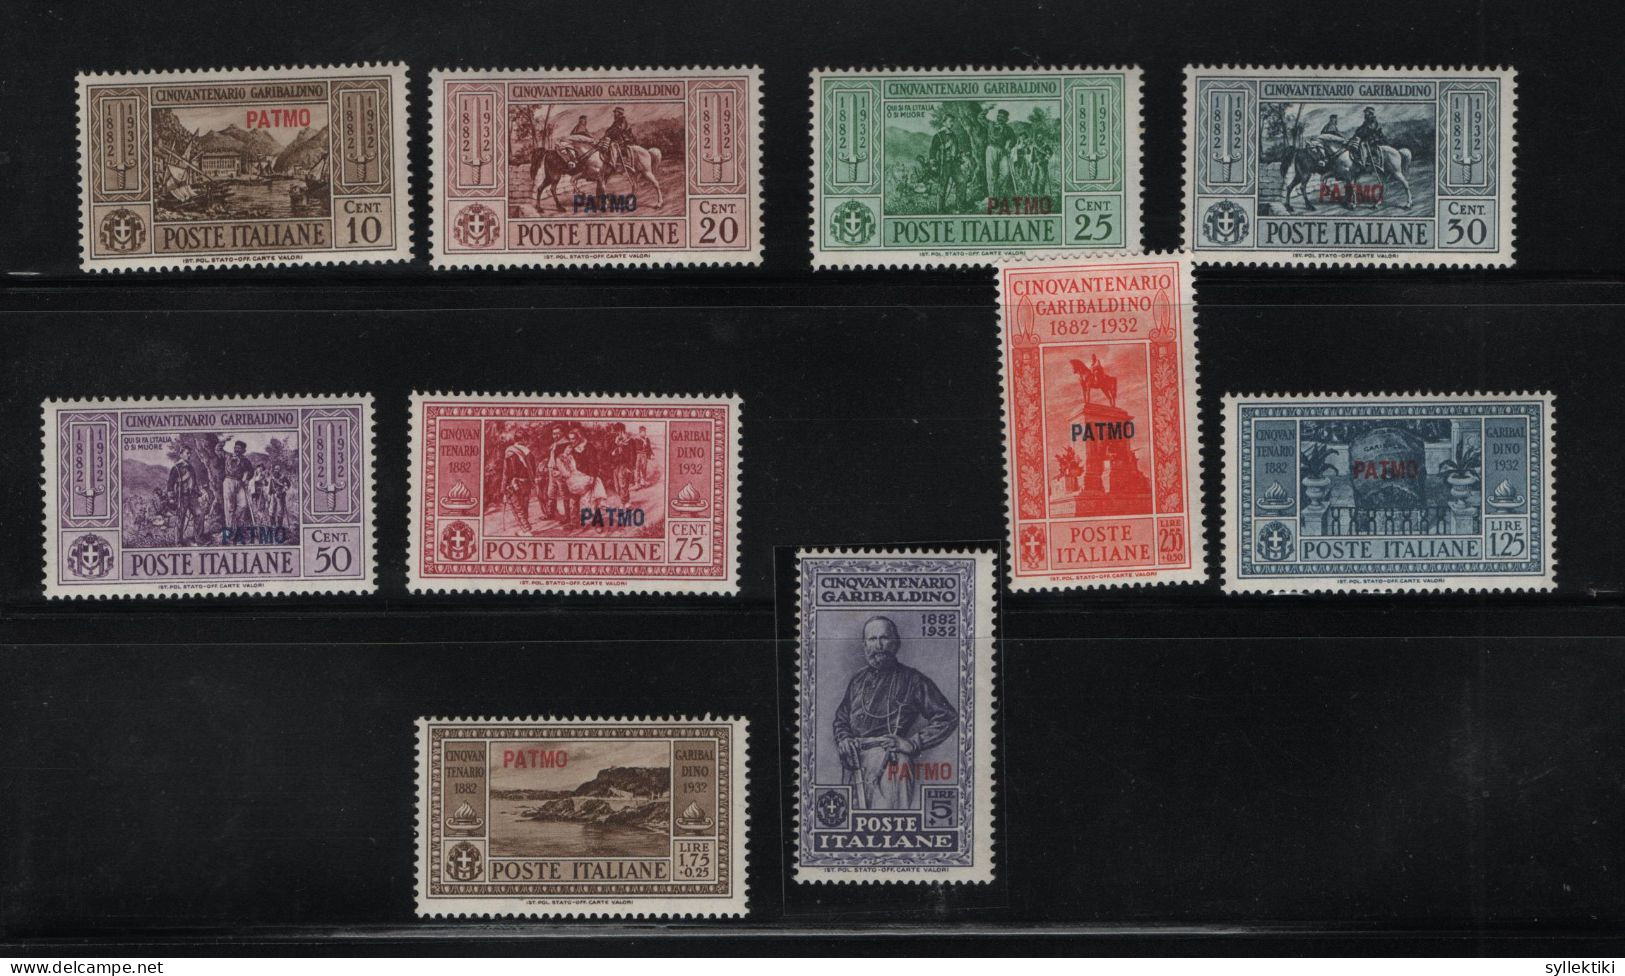 GREECE 1932 DODECANESE GARIBALDI ISSUE PATMO OVERPRINT COMPLETE SET MNH STAMPS   HELLAS No 108XI - 117XI AND VALUE EURO - Dodecanese